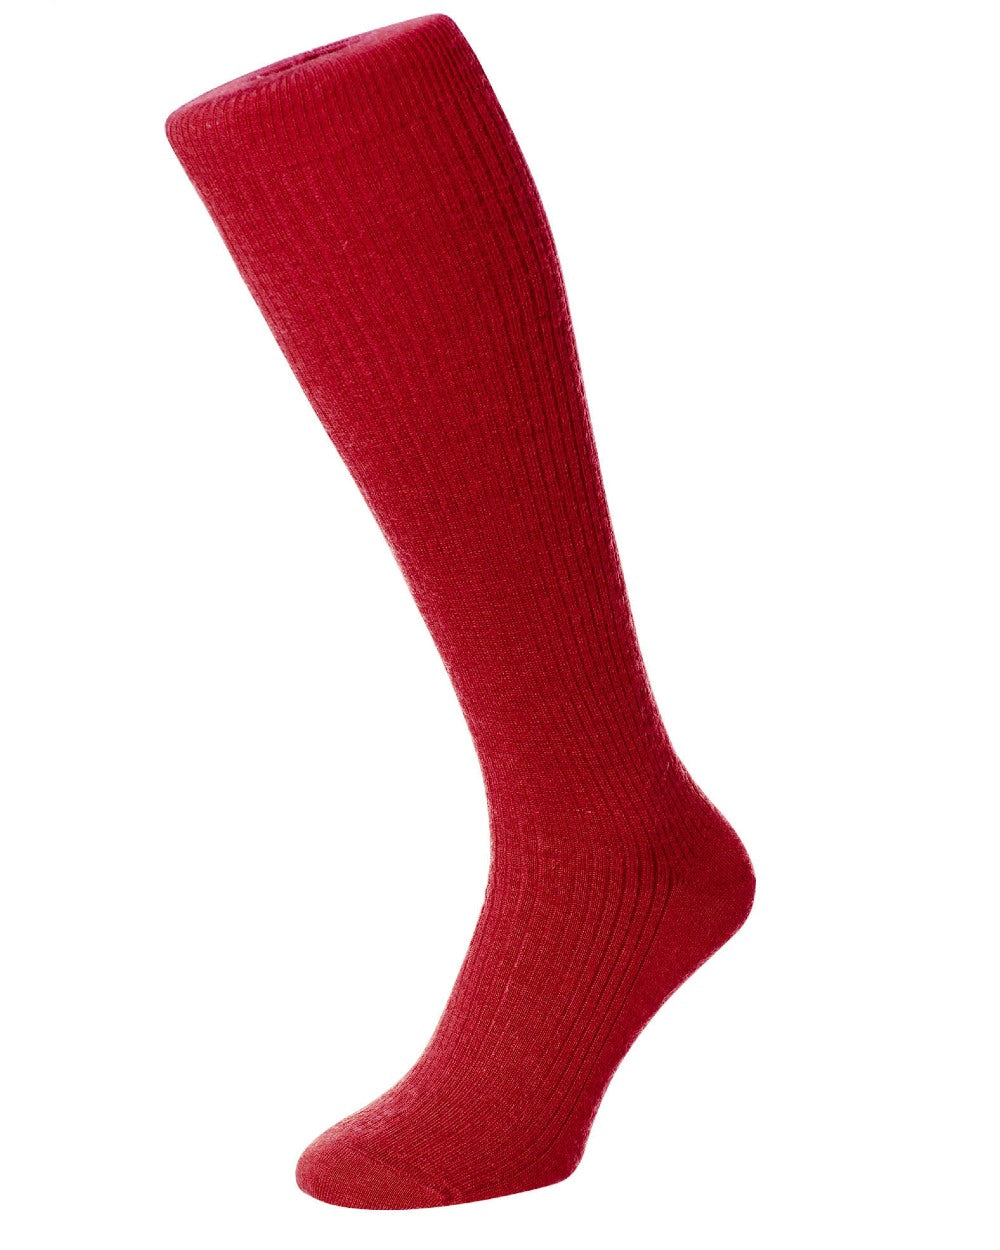 HJ Hall Wool Rich Immaculate Long Socks in Red 